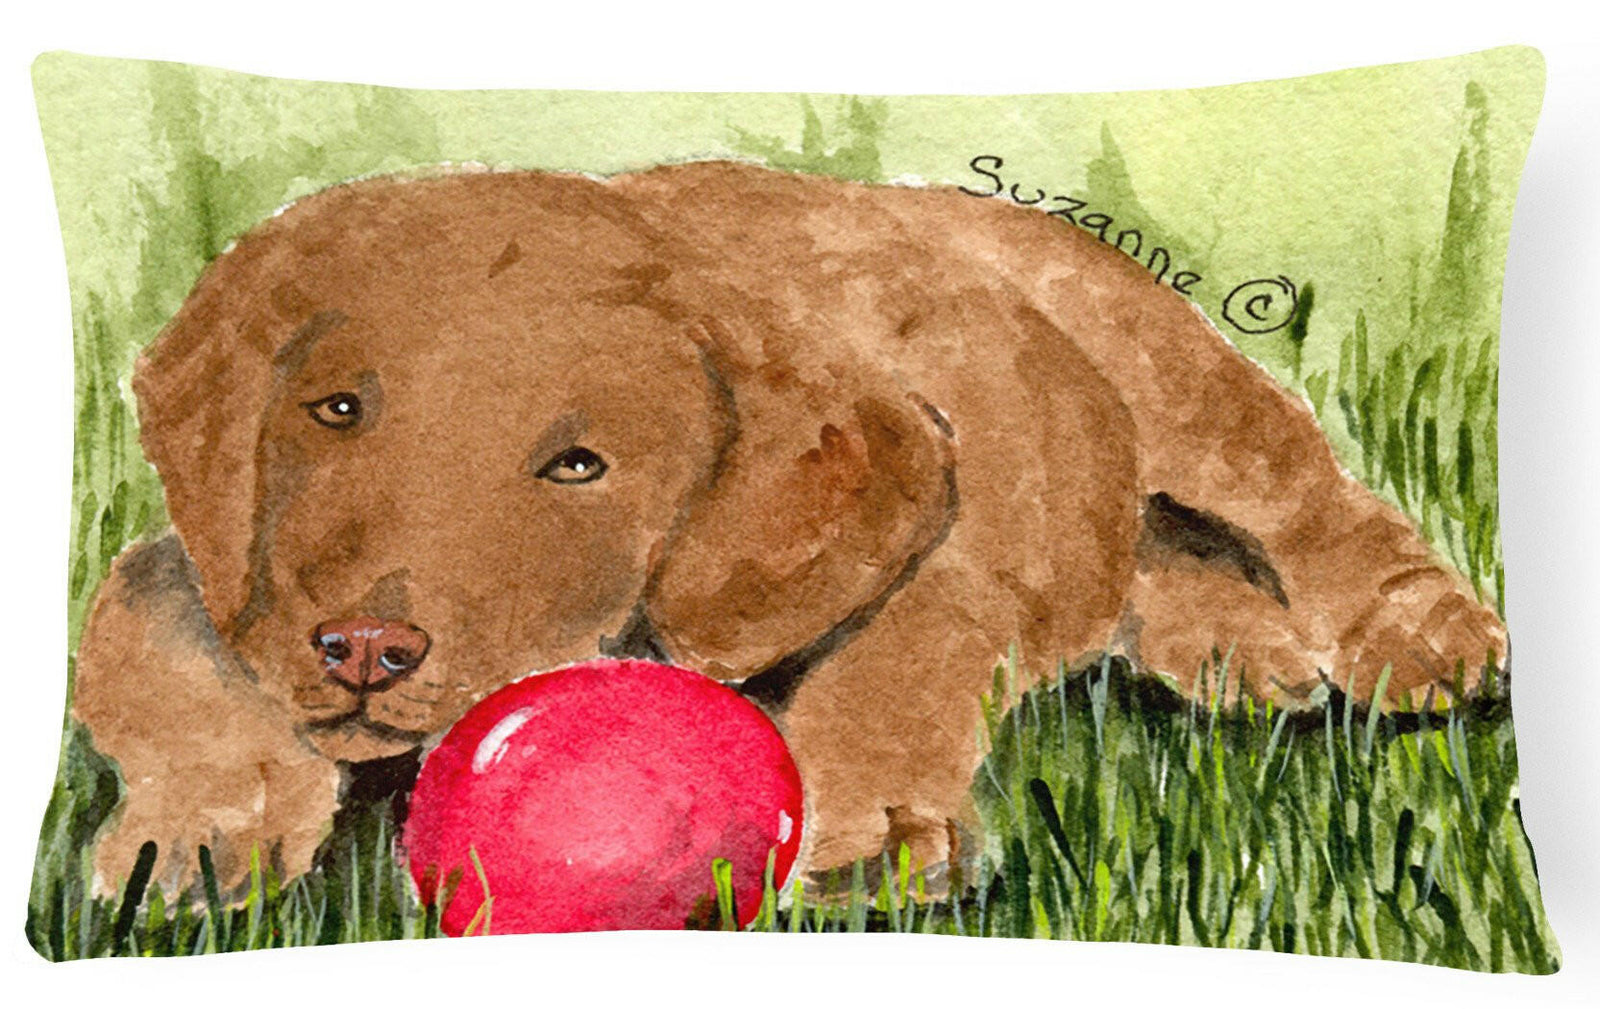 Curly Coated Retriever Decorative   Canvas Fabric Pillow by Caroline's Treasures